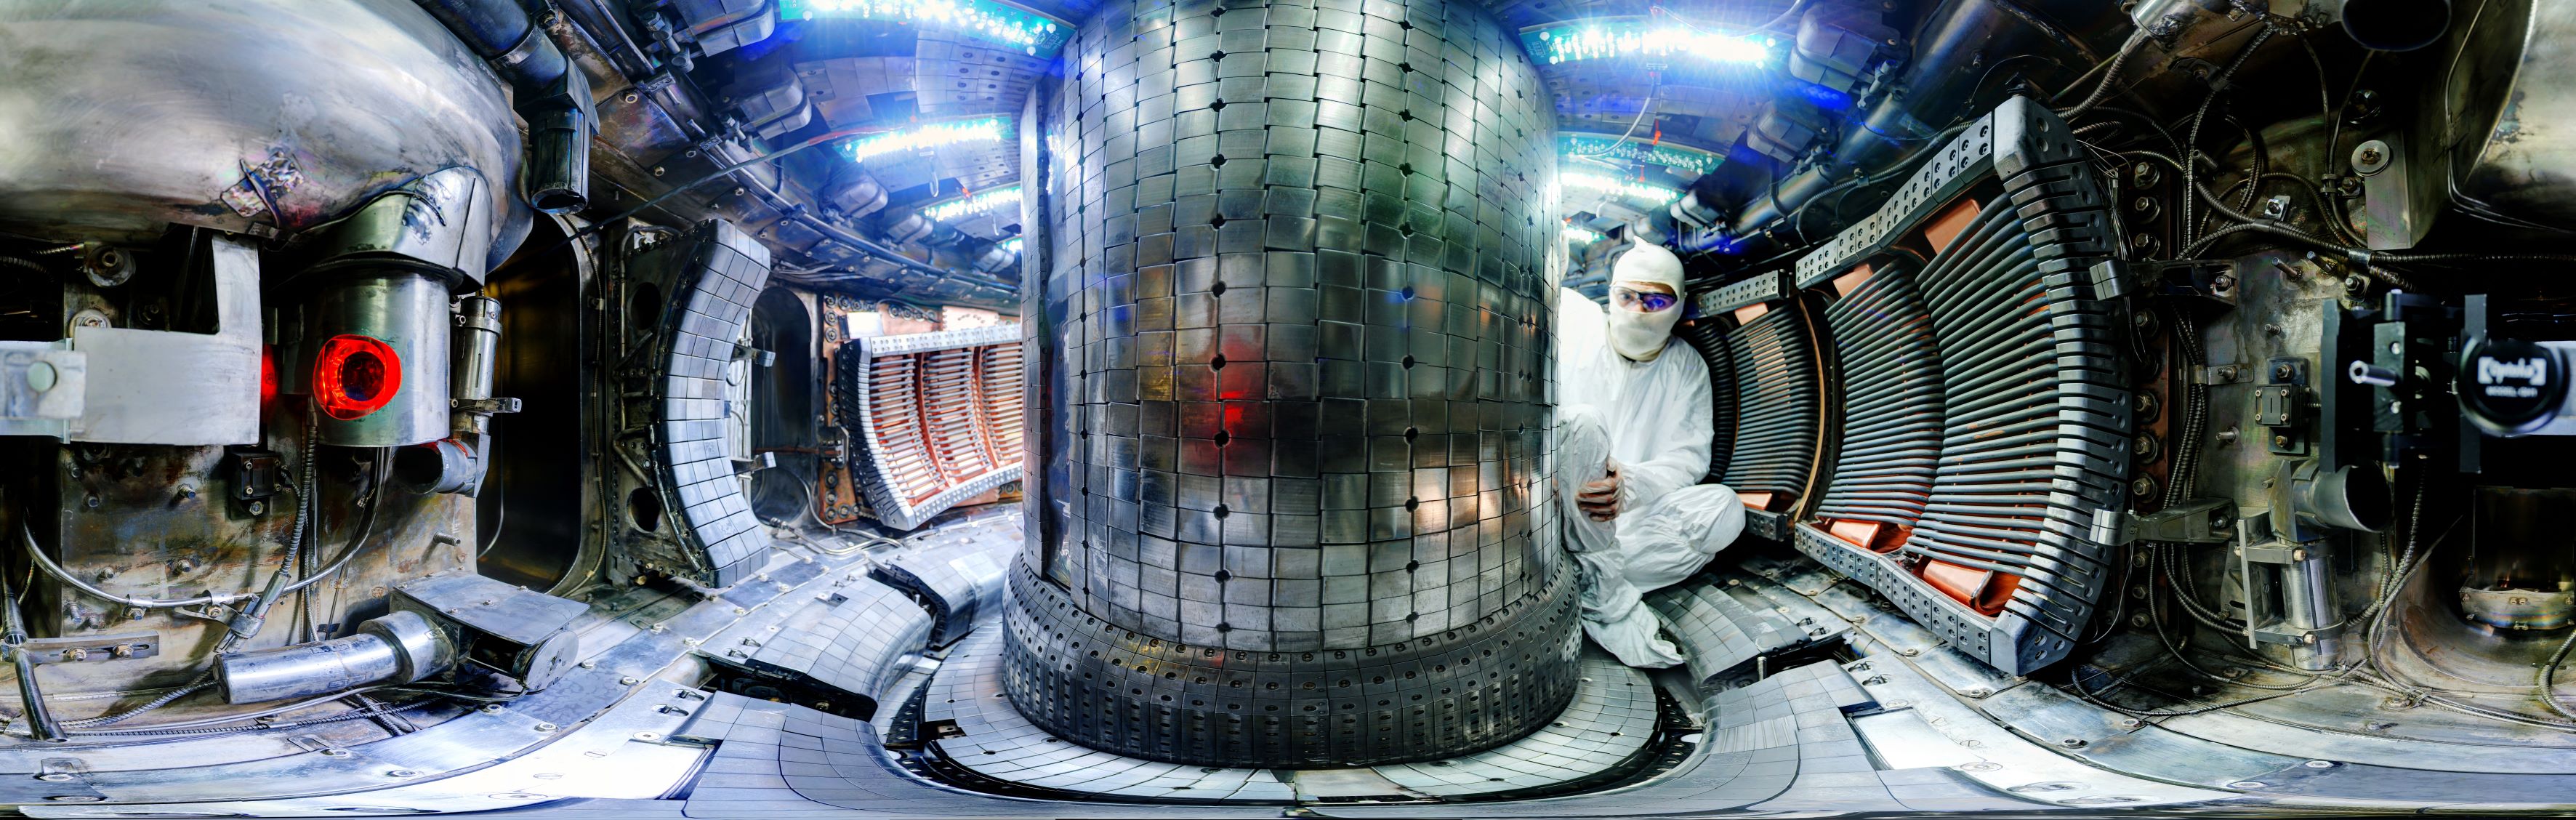 Inside MIT’s C-Mod nuclear fusion reactor.